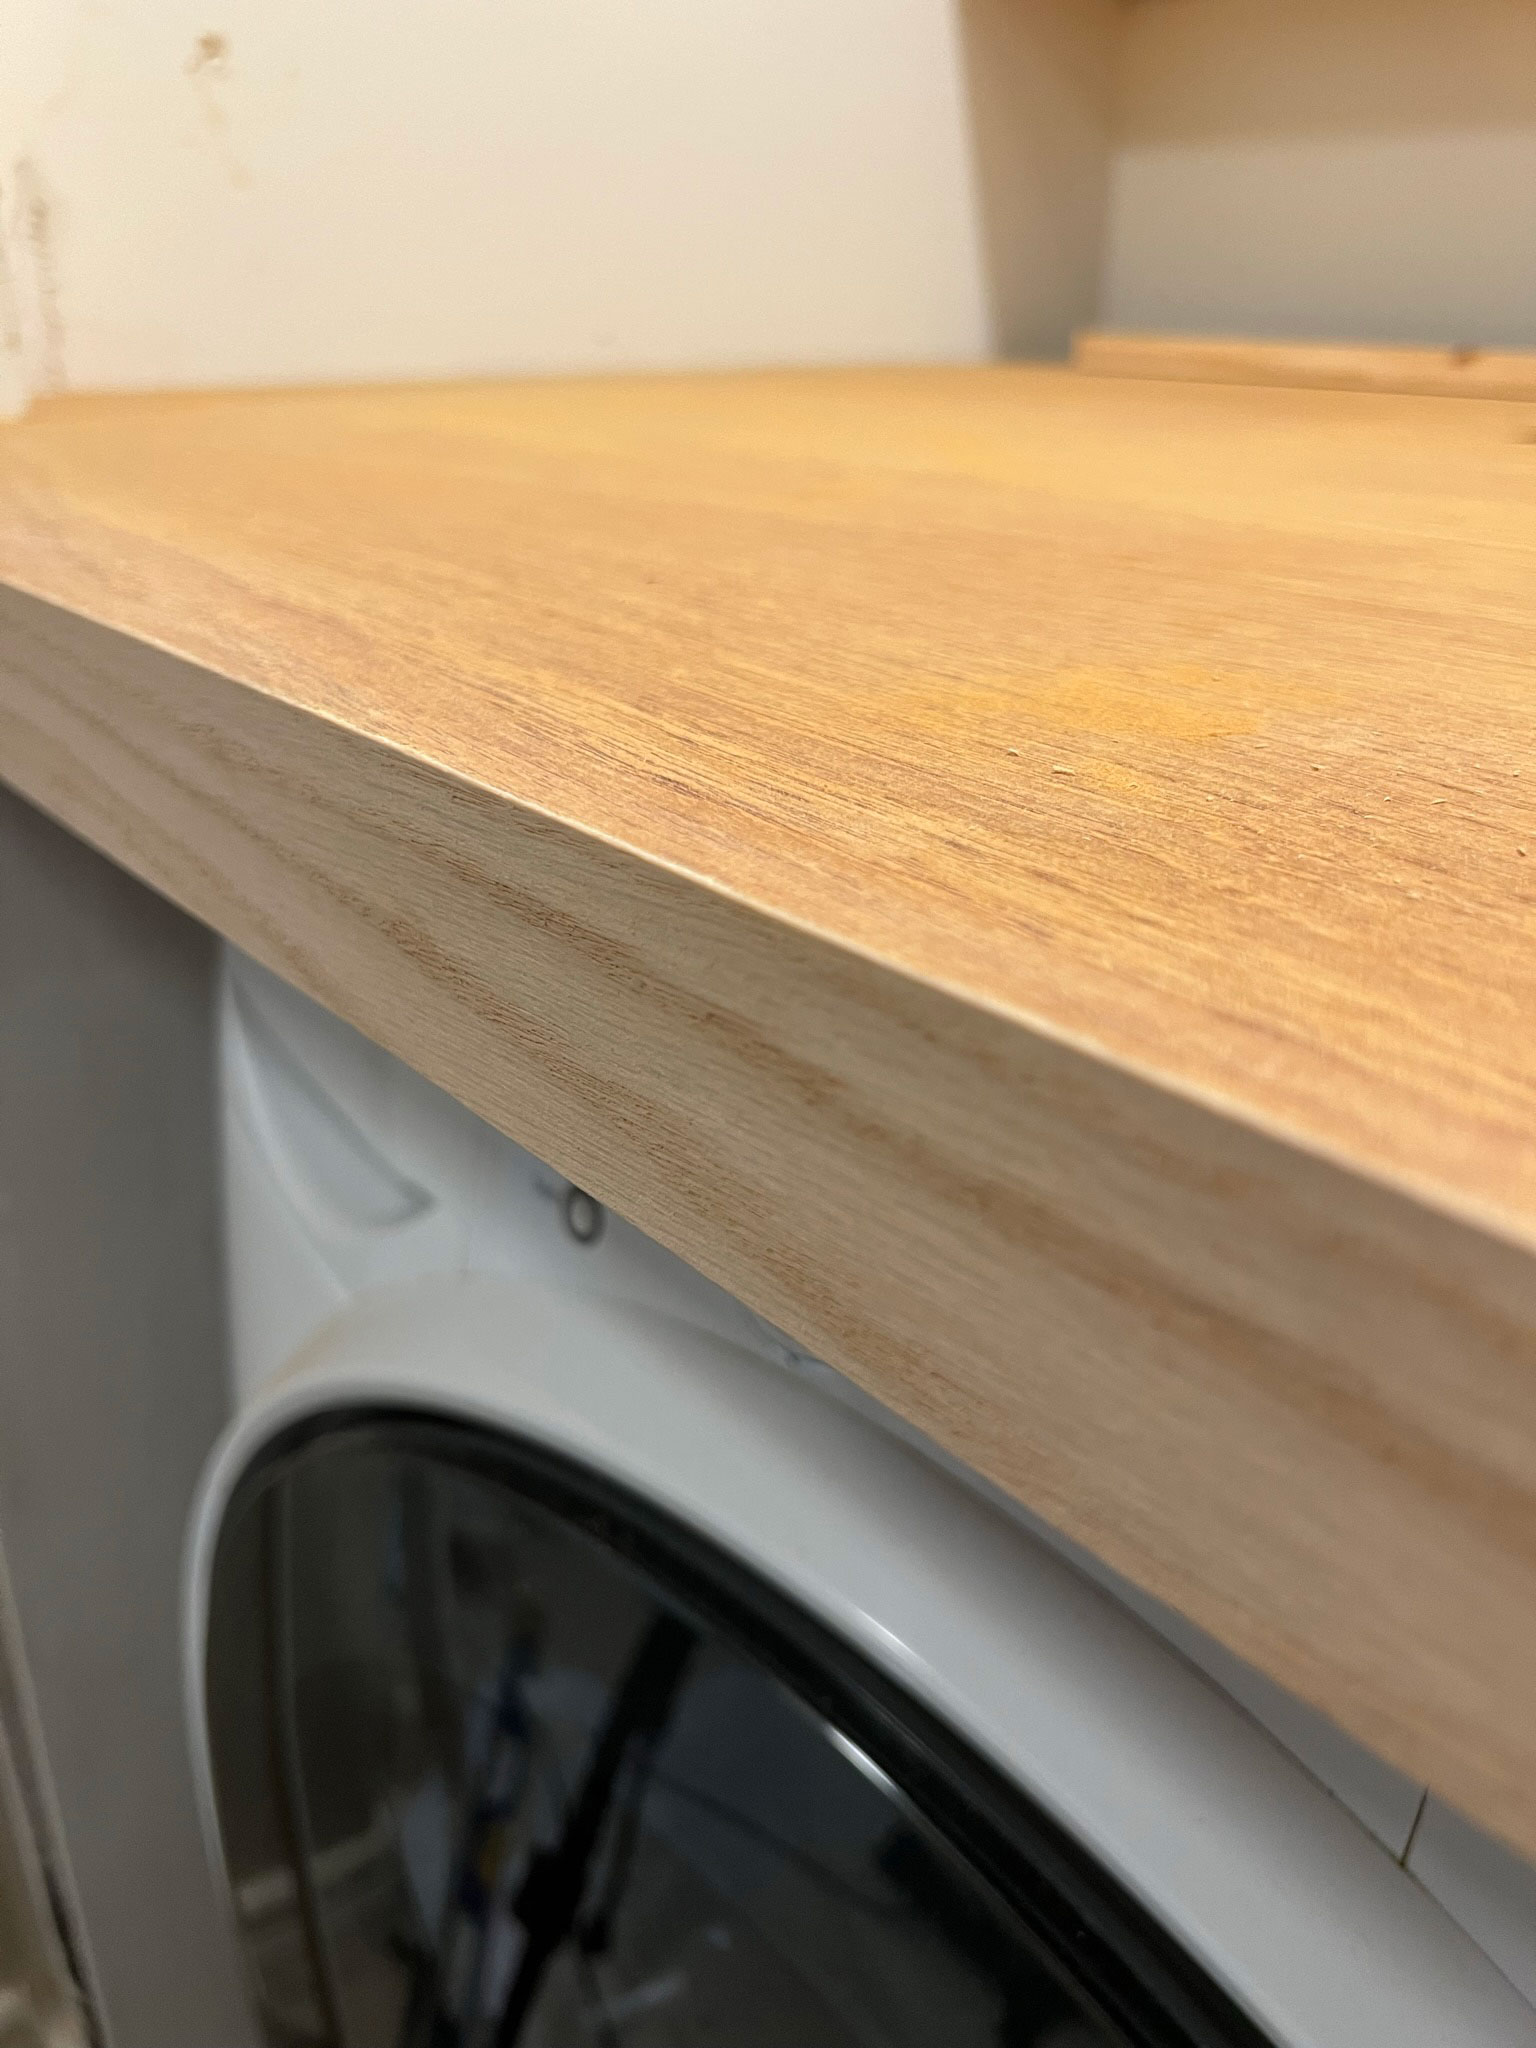 Veneer added to the front of the wood door that we used to make the DIY laundry room countertop, looks like a solid piece of wood